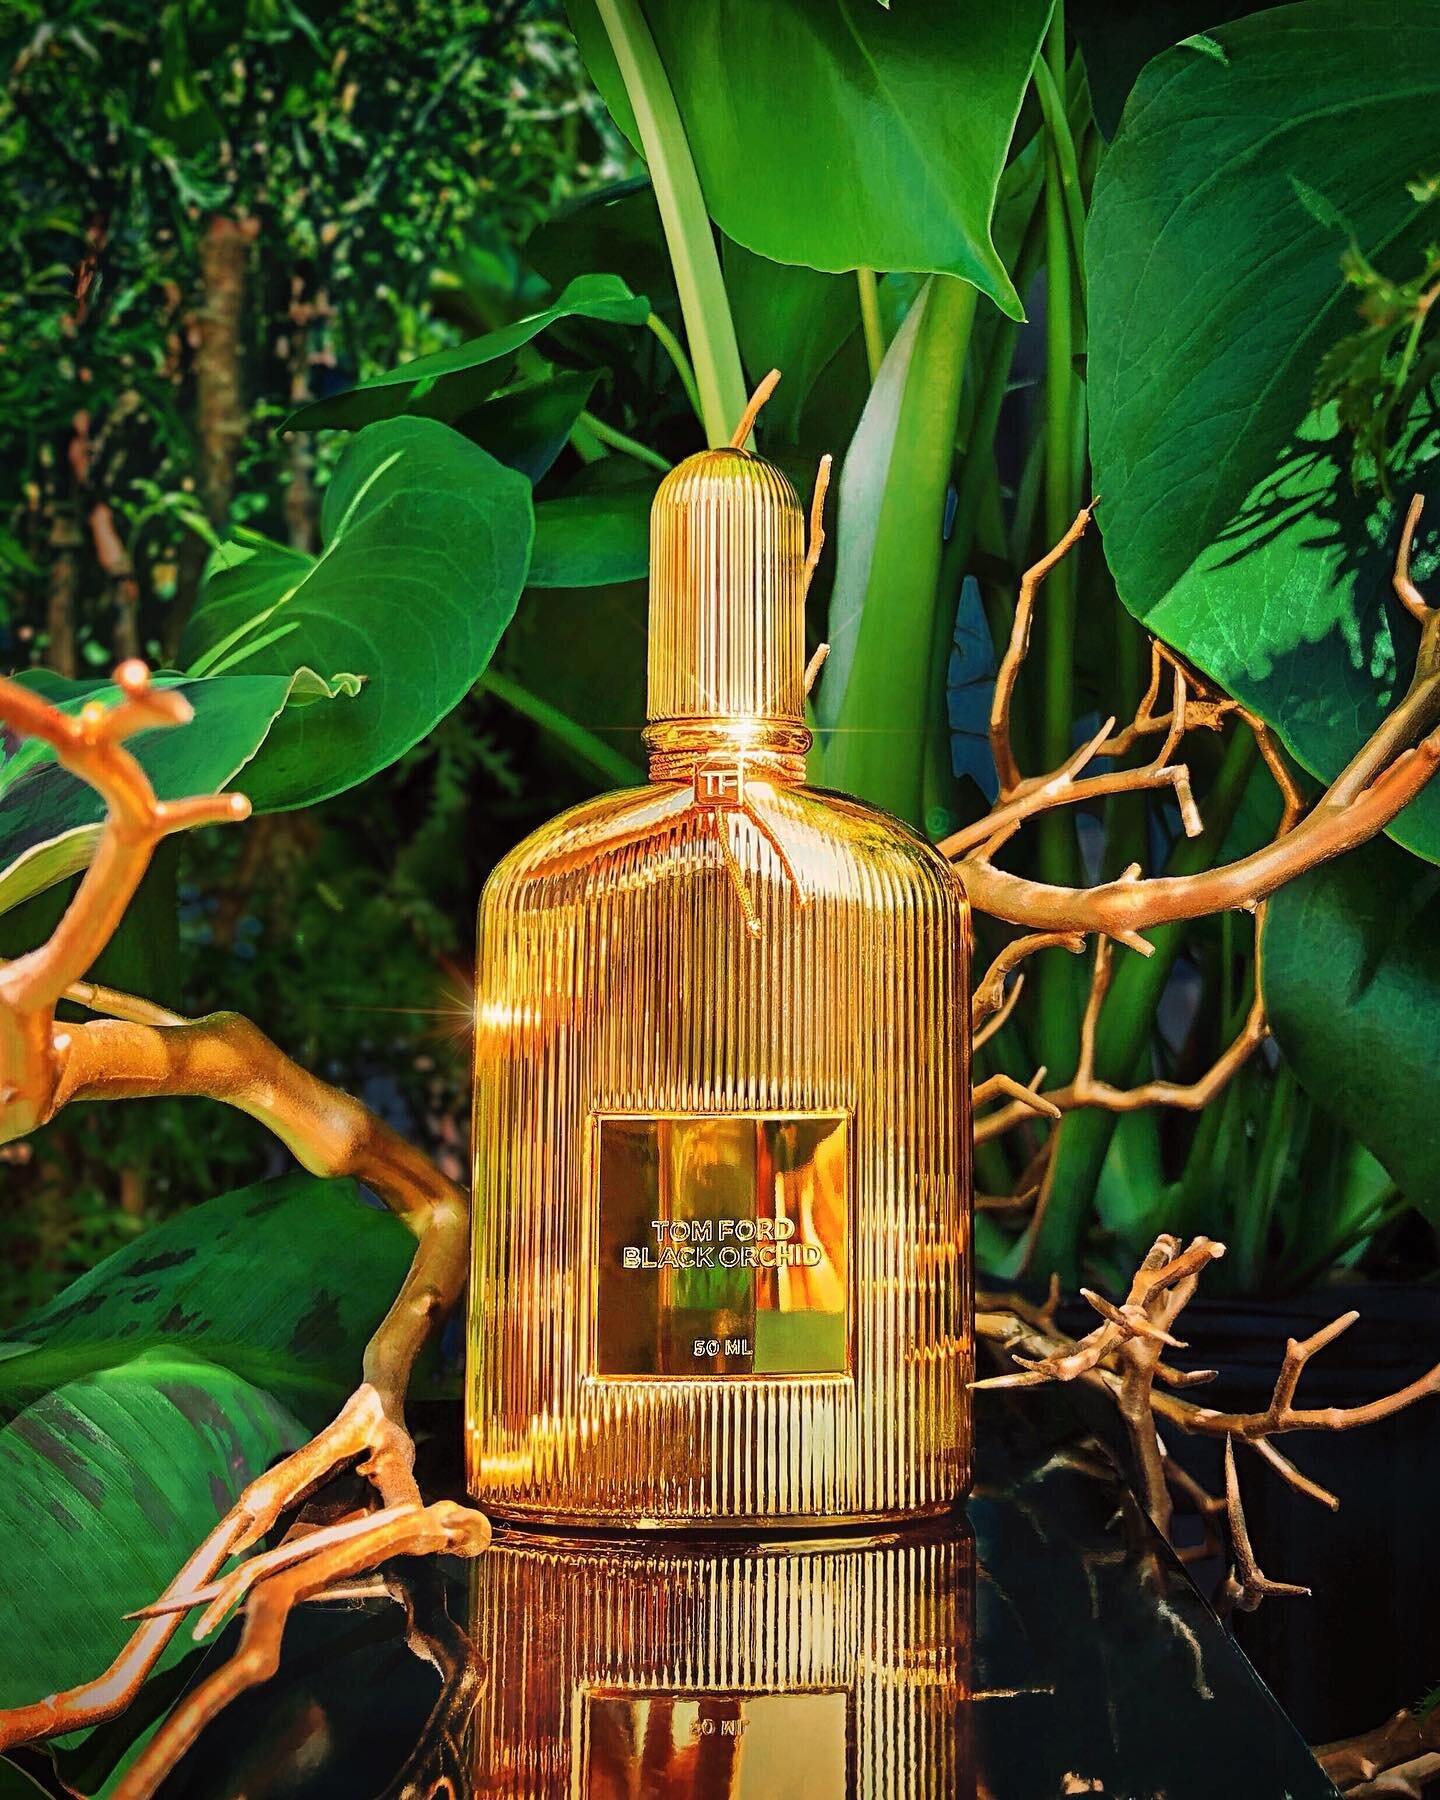 To emulate the beautifully repackaged @TomFordBeauty Black Orchid Perfume (kindly gifted by the brand), I stylized the bottle in a forest of lush jungle plants that I picked up at the @PortlandNursery set on top of black lacquer boxes from @TheContai